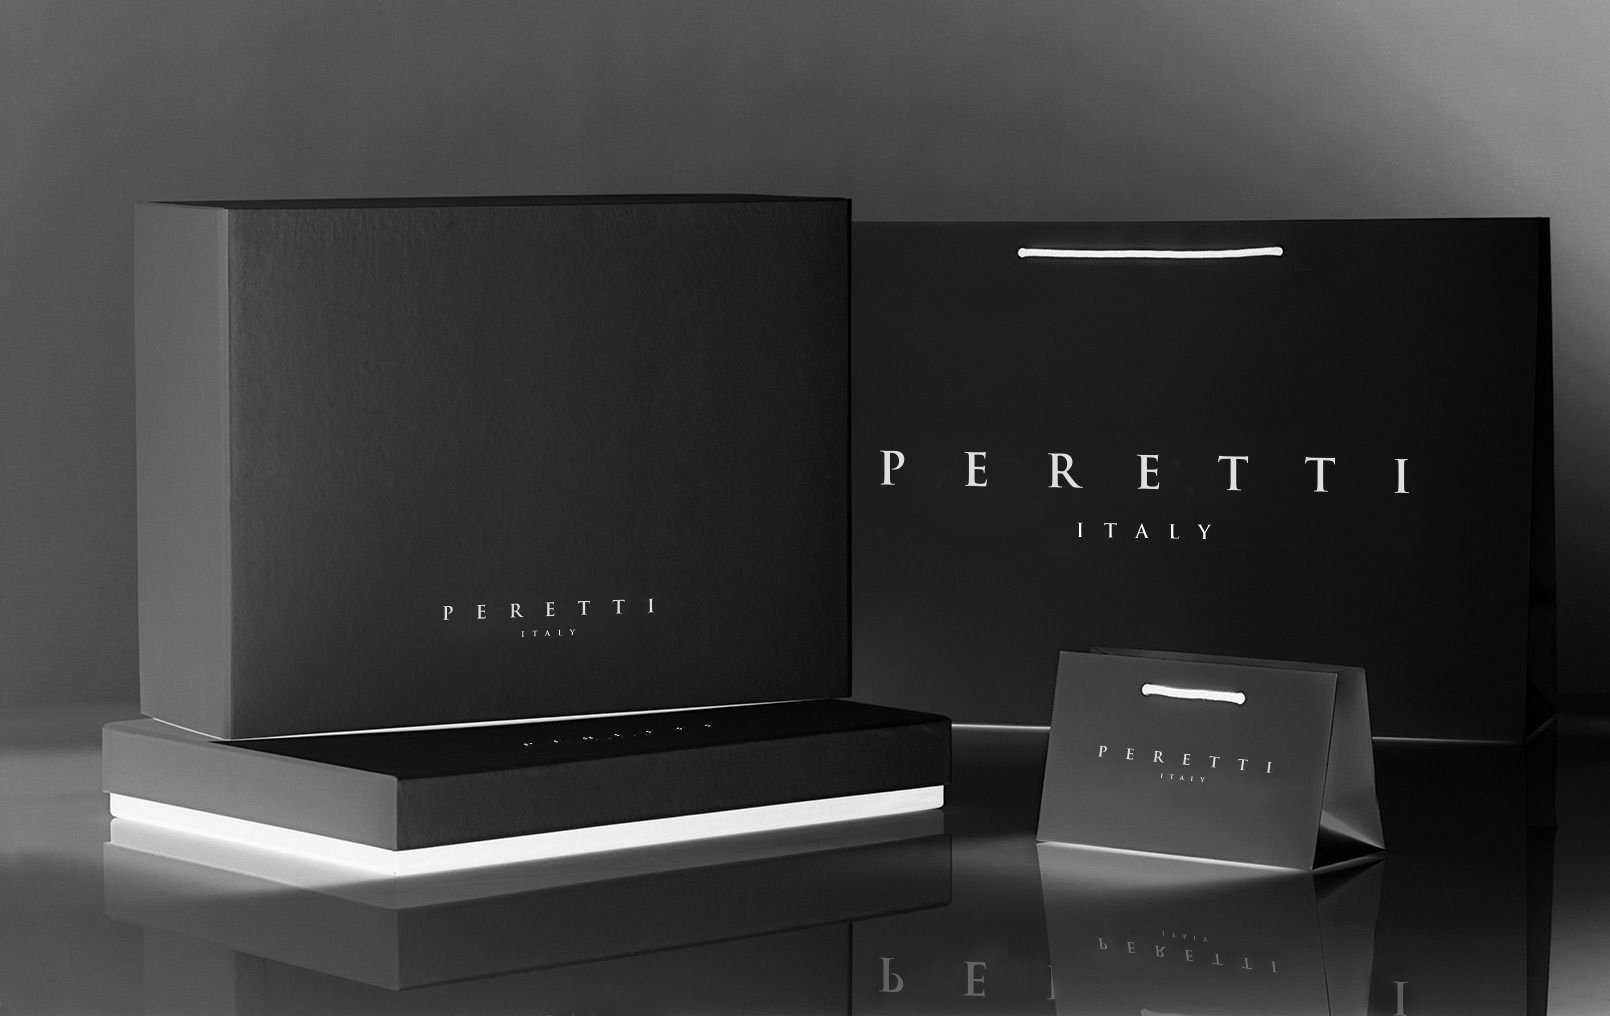 Black Peretti Italy Boxes and Bags